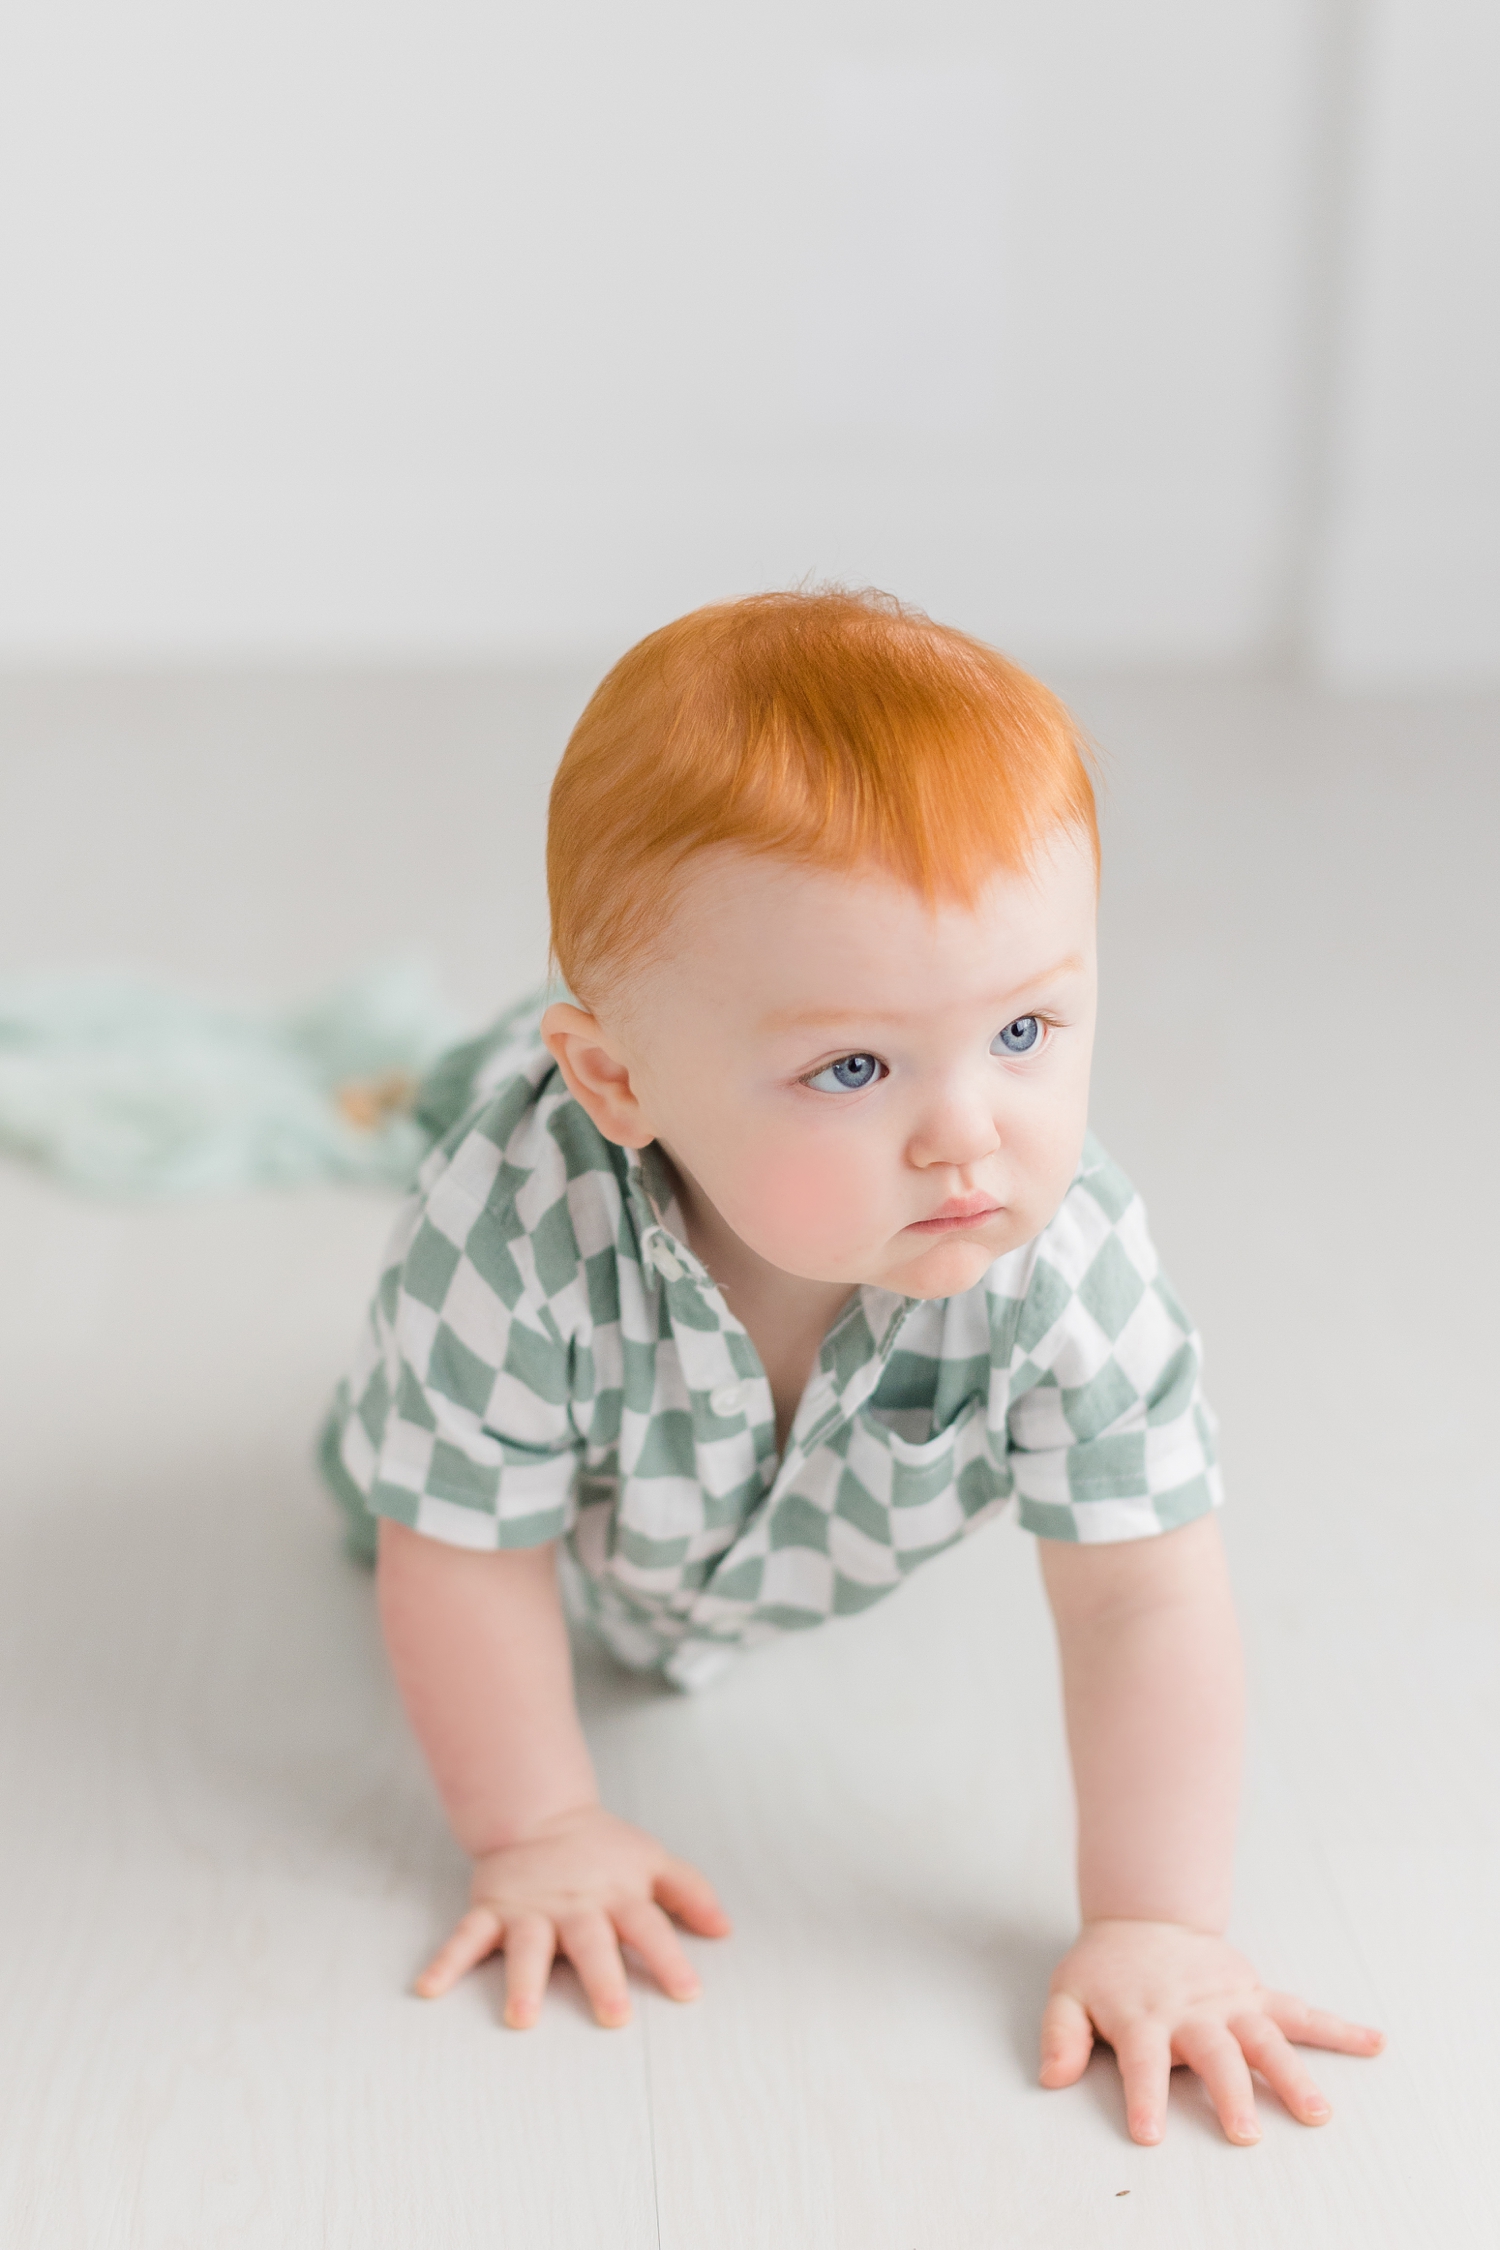 Baby Slater dressed in a mint green and white checkered button down, crawls across the floor of an all white photography studio | CB Studio